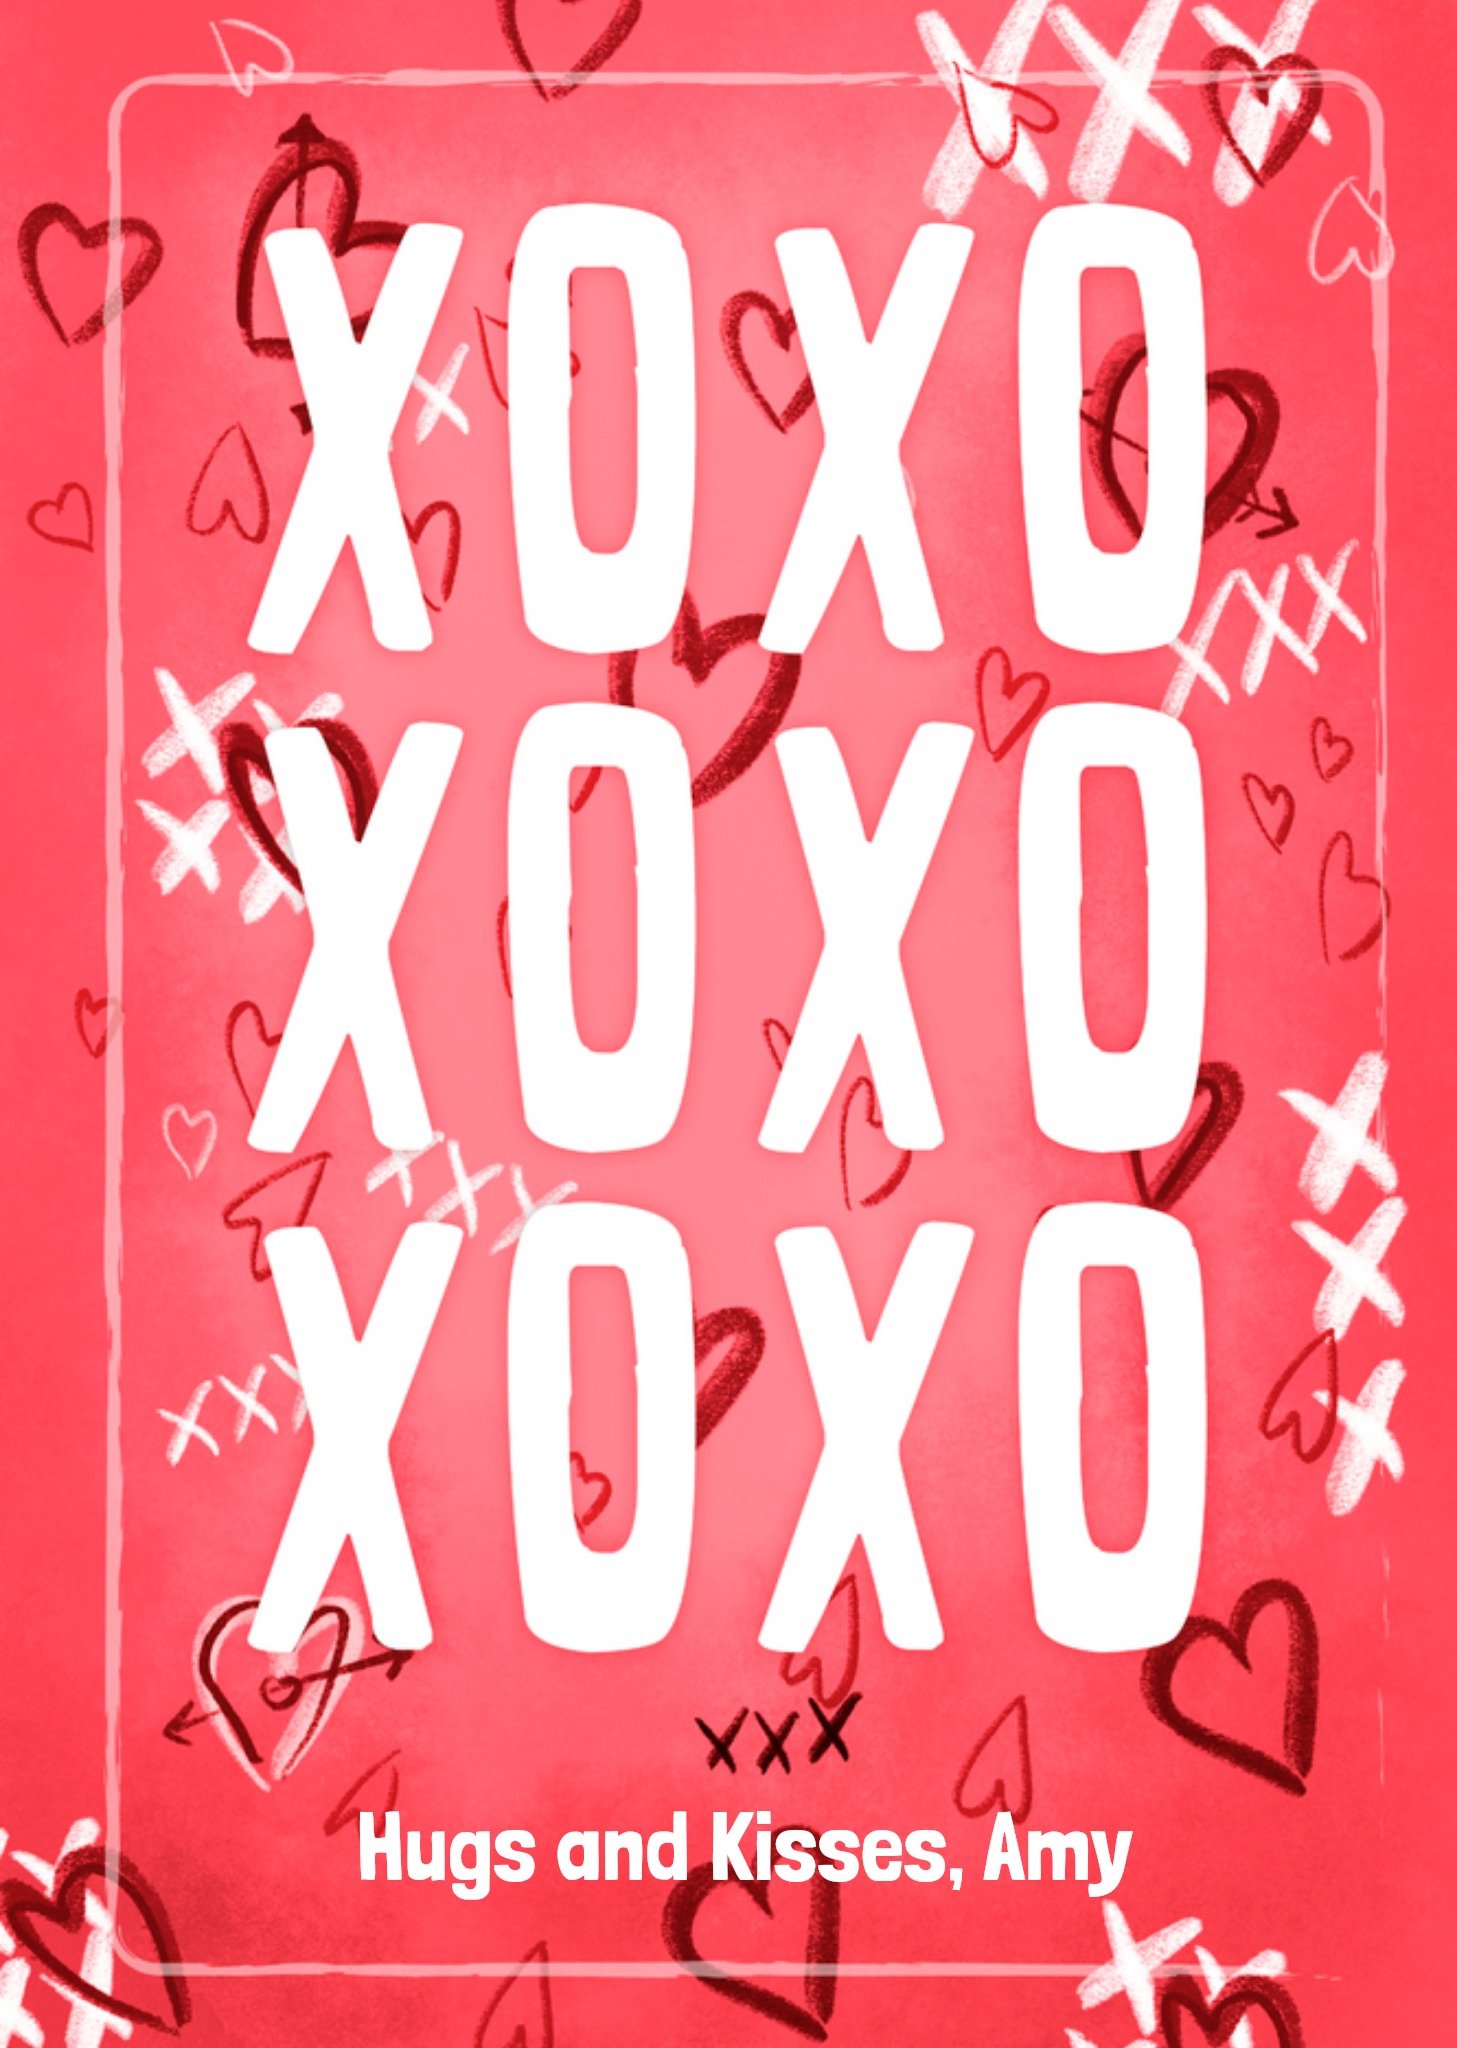 Moonpig Fishuals Xoxo Hugs And Kisses Typography Valentine's Day Card Ecard